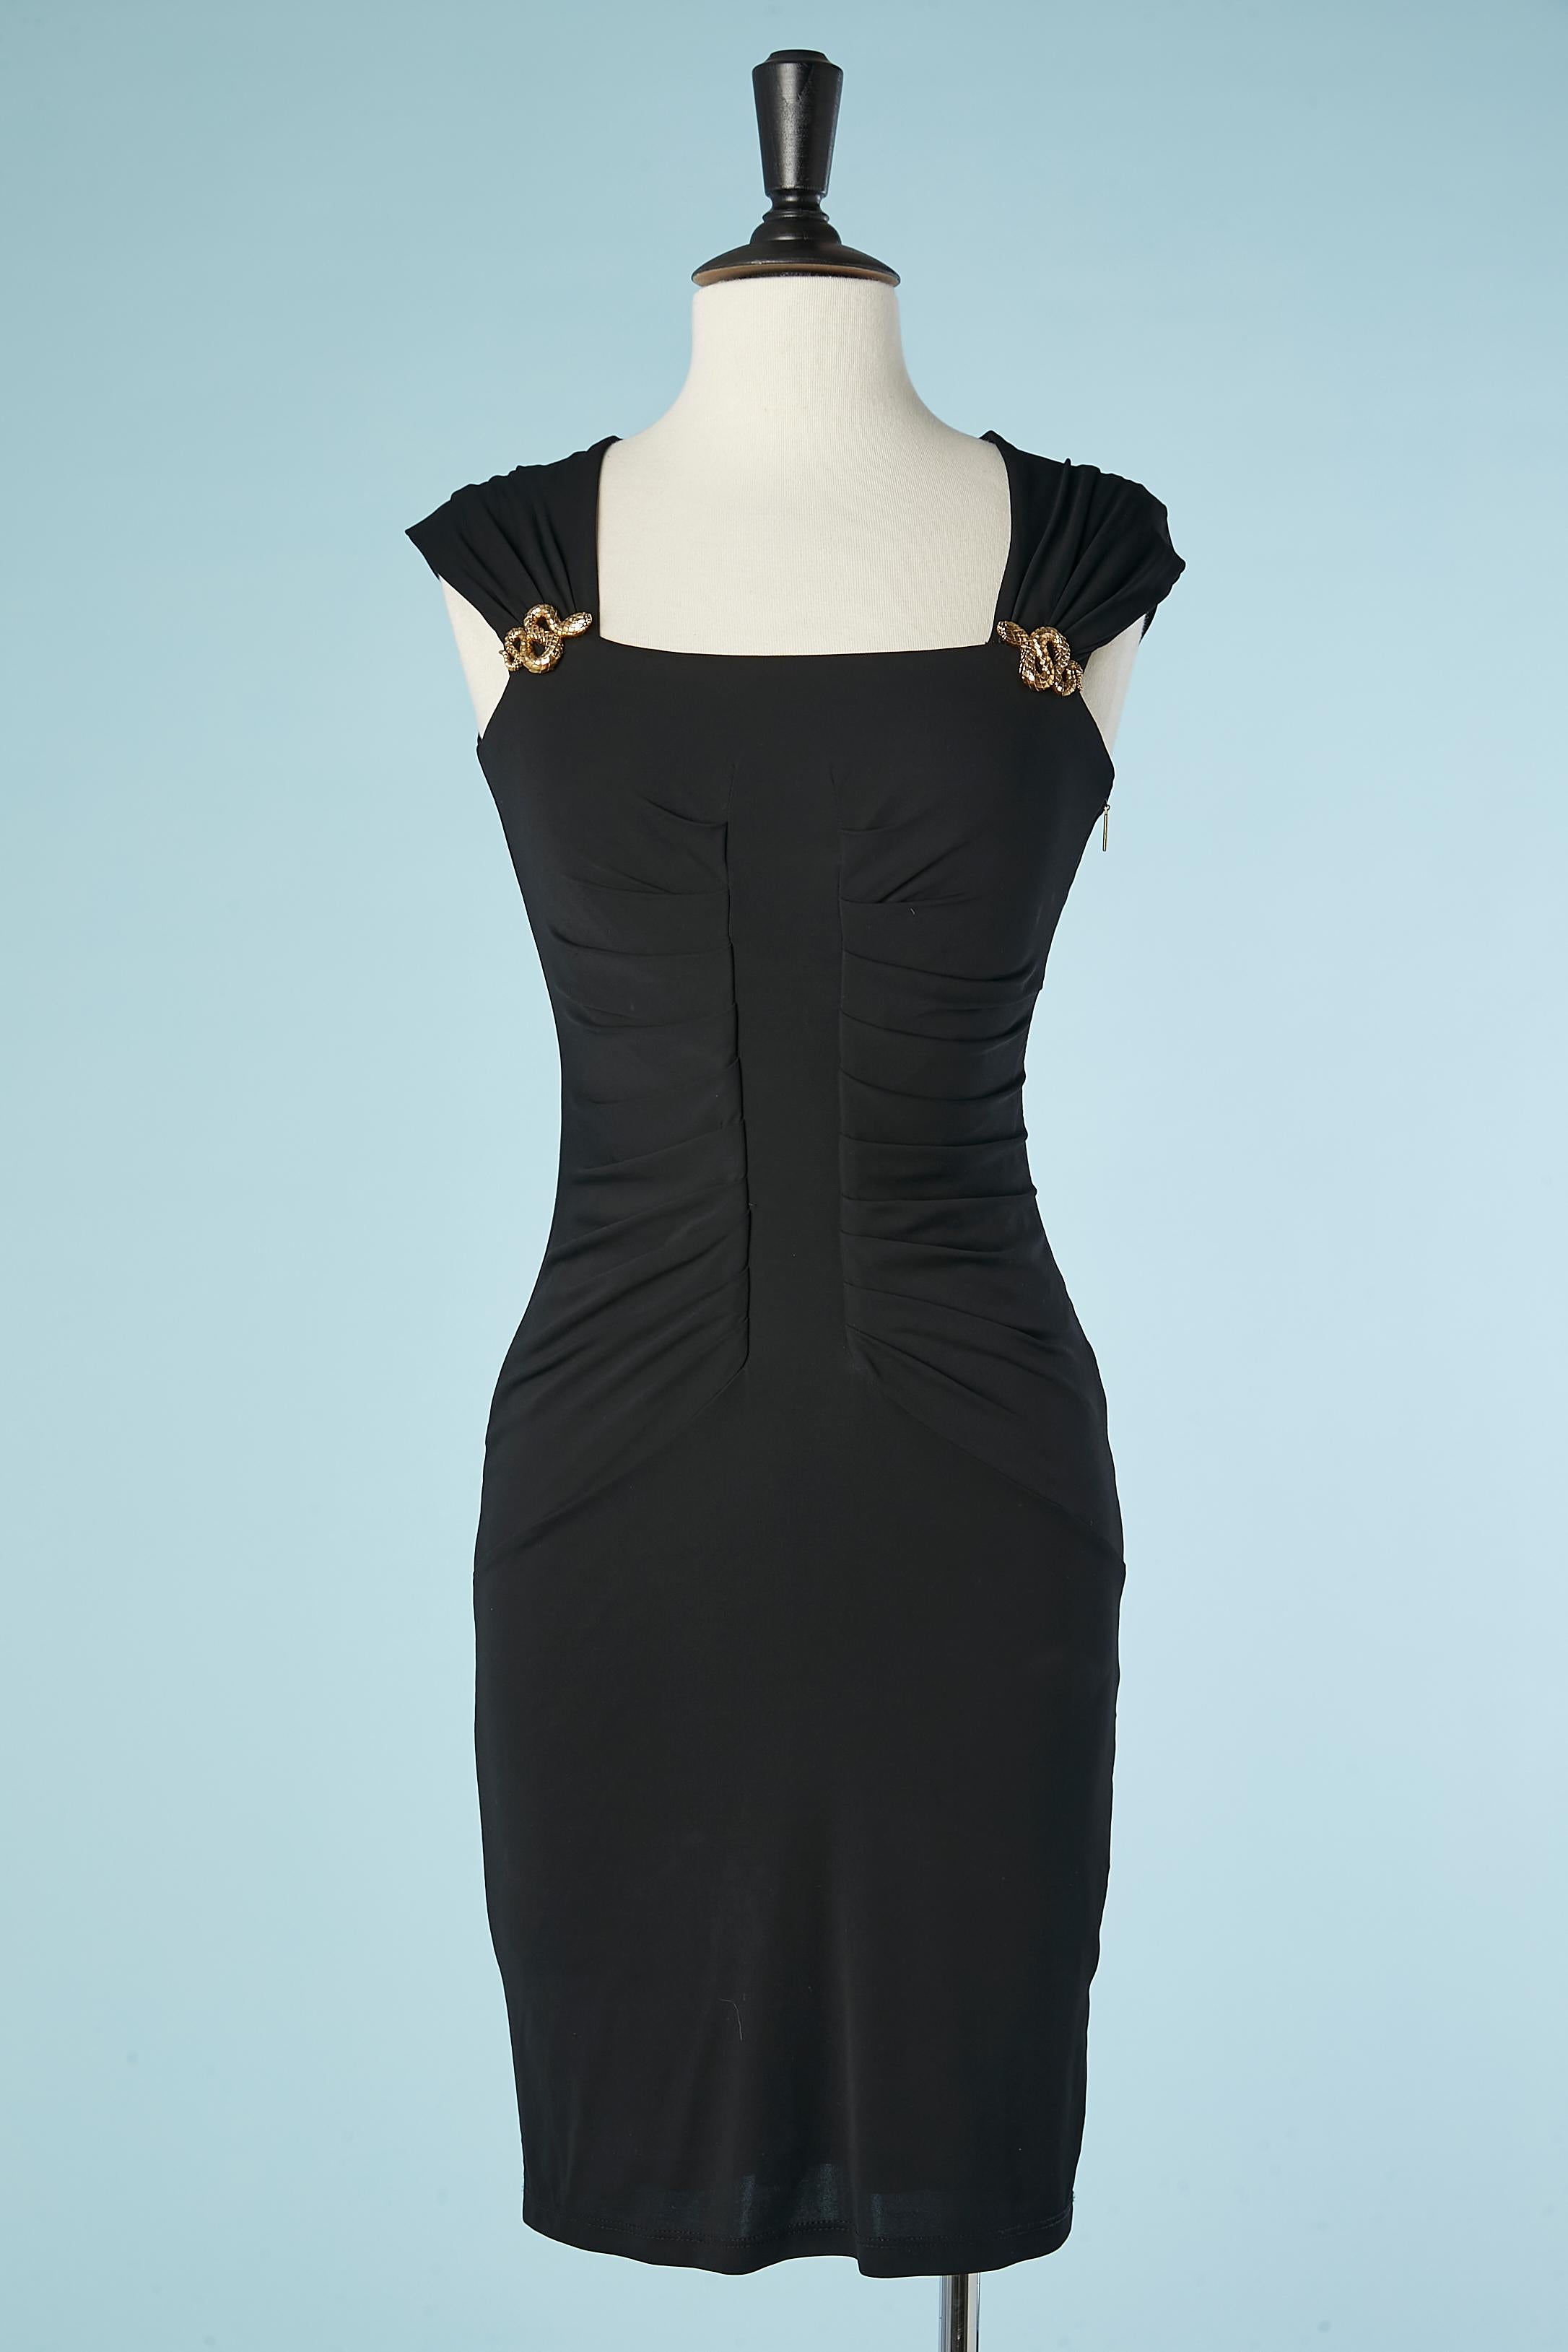 Black jersey sleeveless cocktail dress with snake brooch. Zip on the left with a branded zip-puller.
SIZE S 